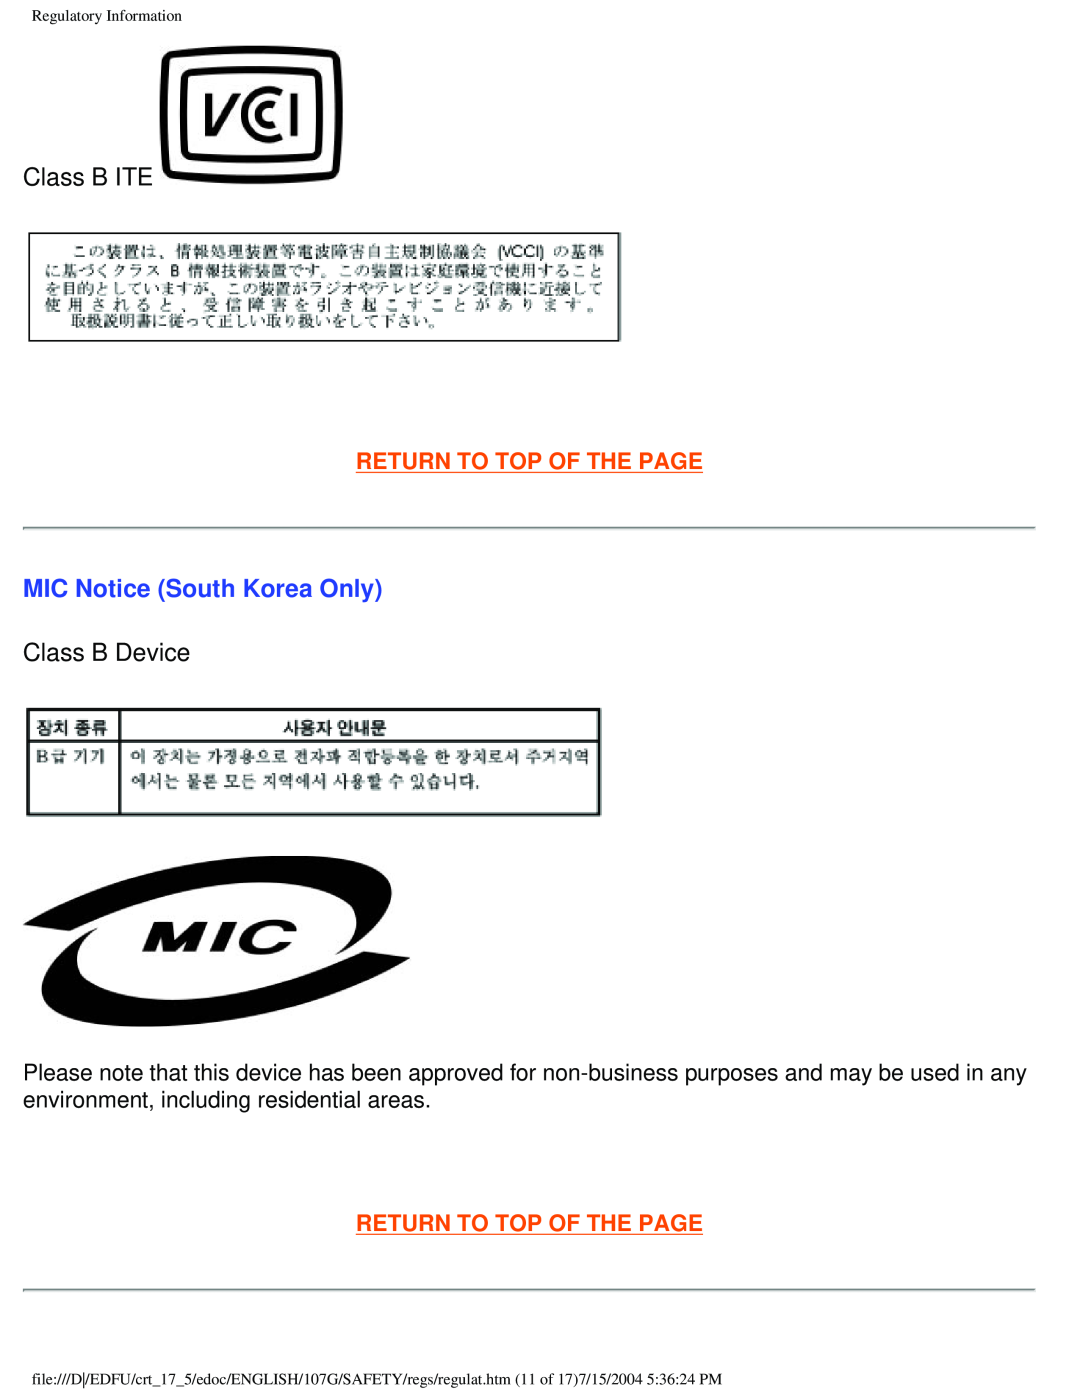 Philips 107G Class B ITE, MIC Notice South Korea Only, Class B Device, Return To Top Of The Page, Regulatory Information 